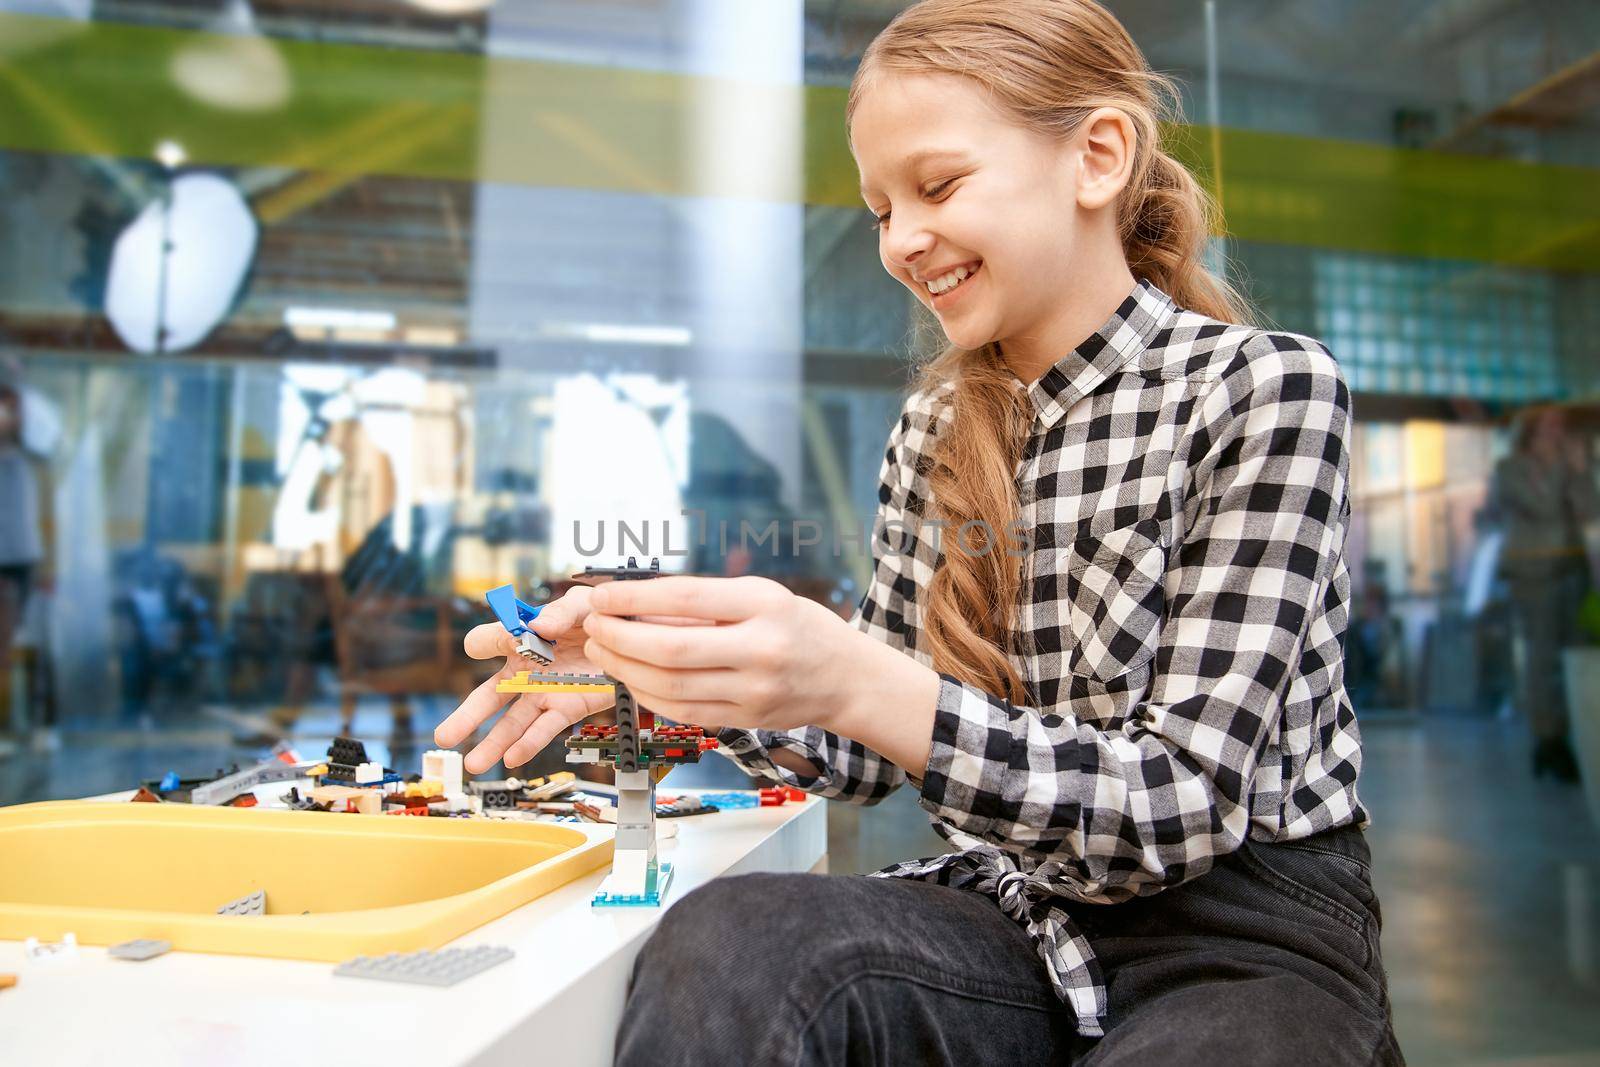 Selective focus of lovely smiling caucasian girl working on project, using colorful parts and having positive emotions and joy. Building kit for toys creating. Concept of science engineering.